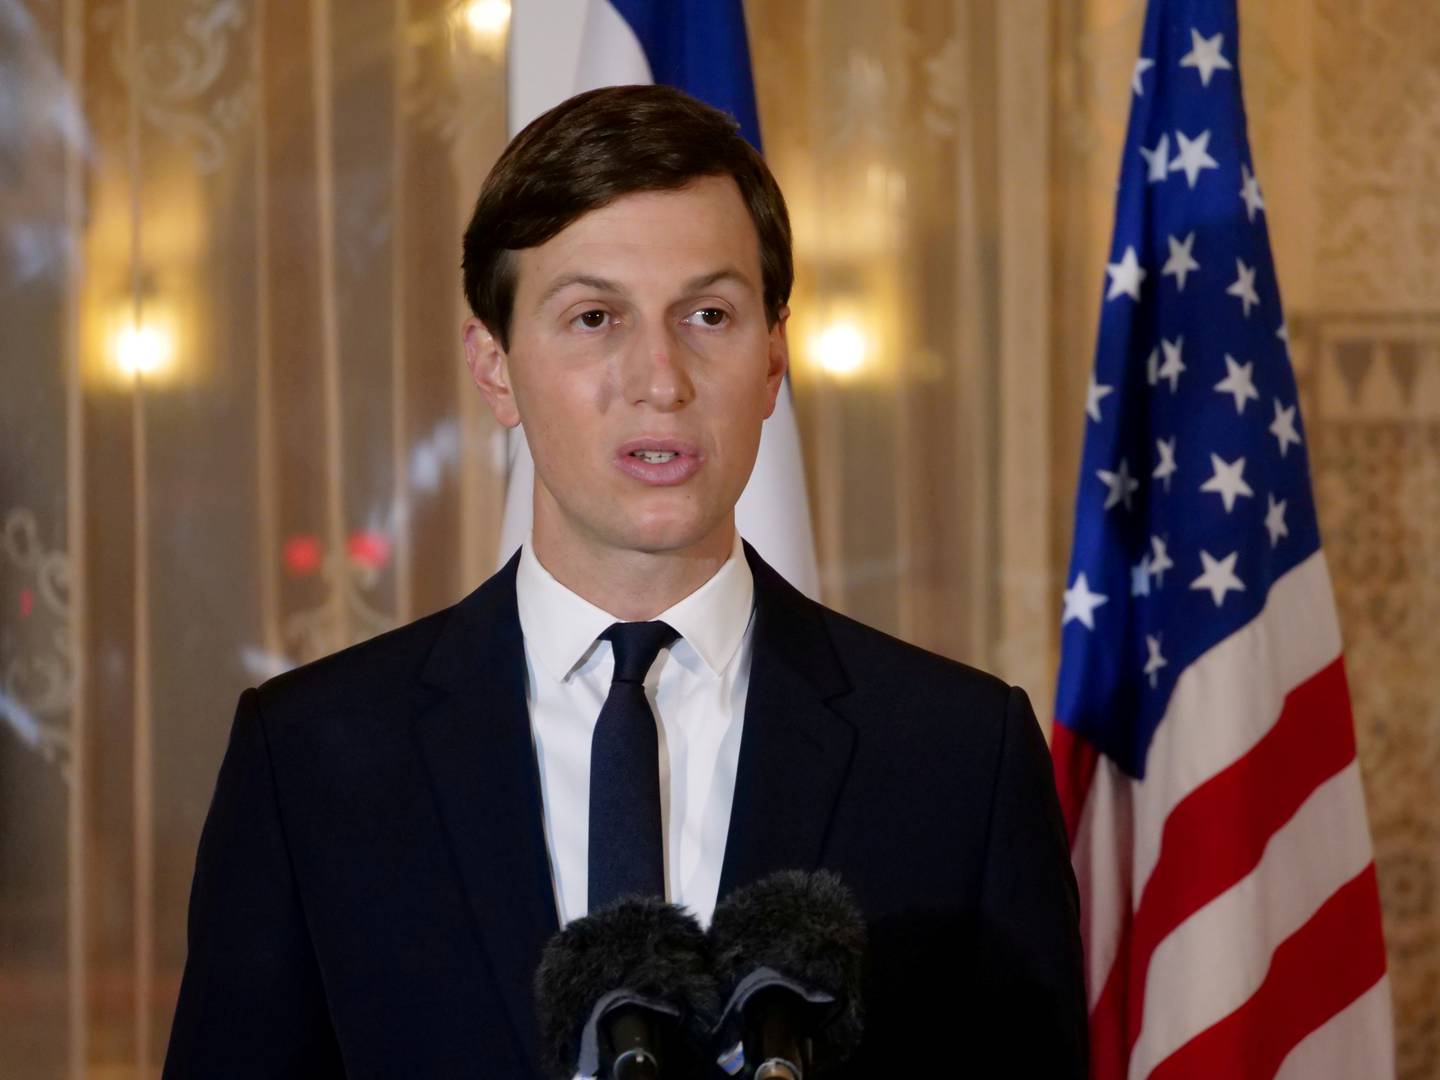 Jared Kushner's 'deal of the century' was rejected by the Palestinians. Reuters